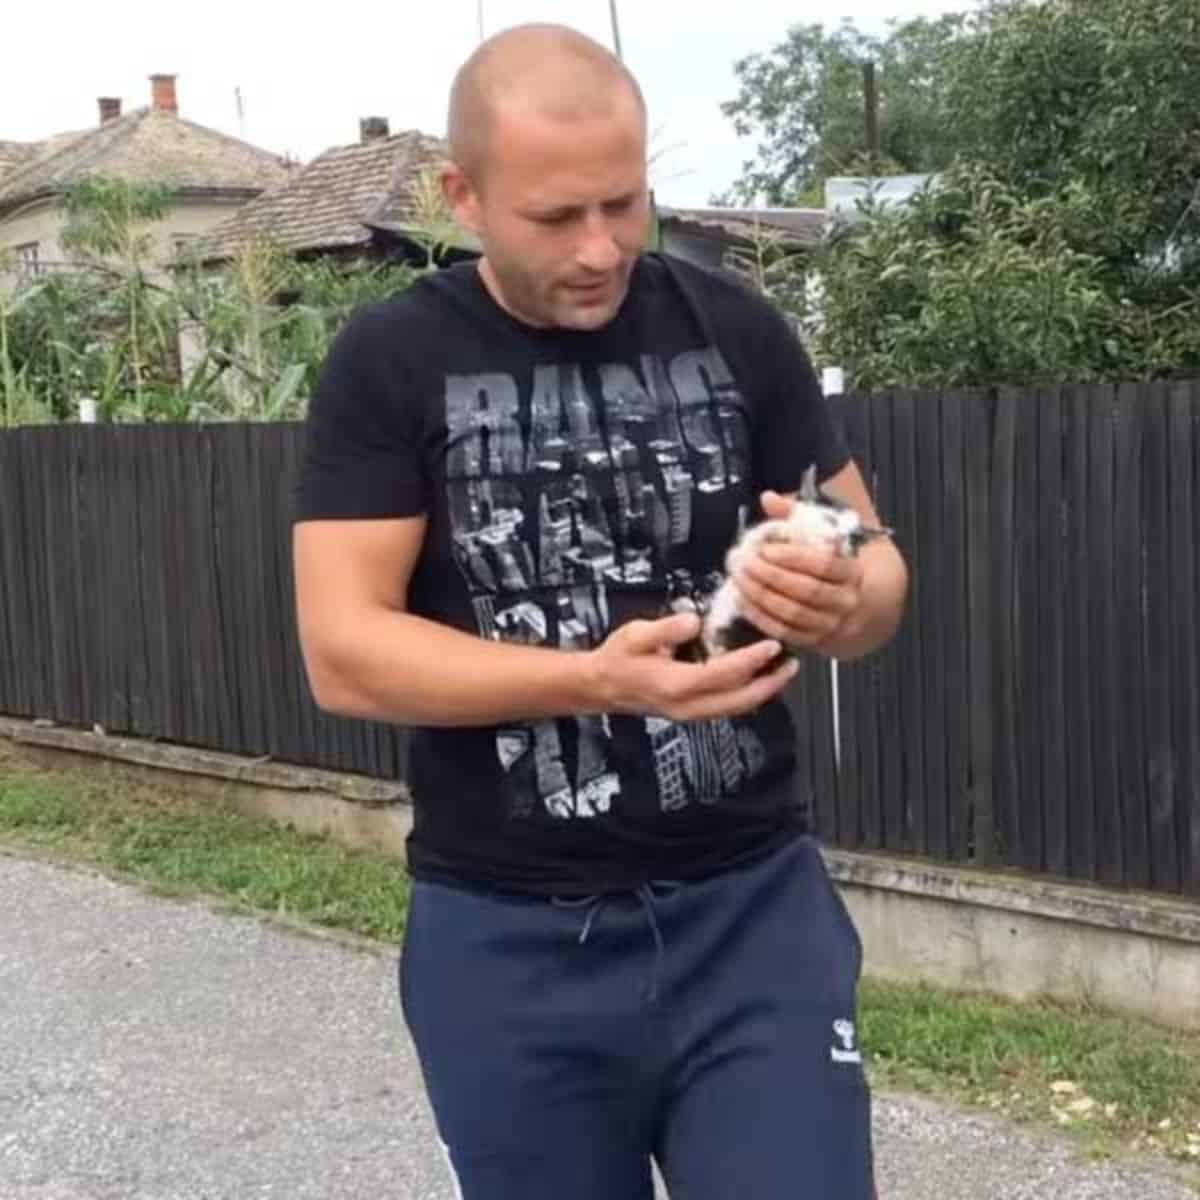 a man rescued a kitten from the street